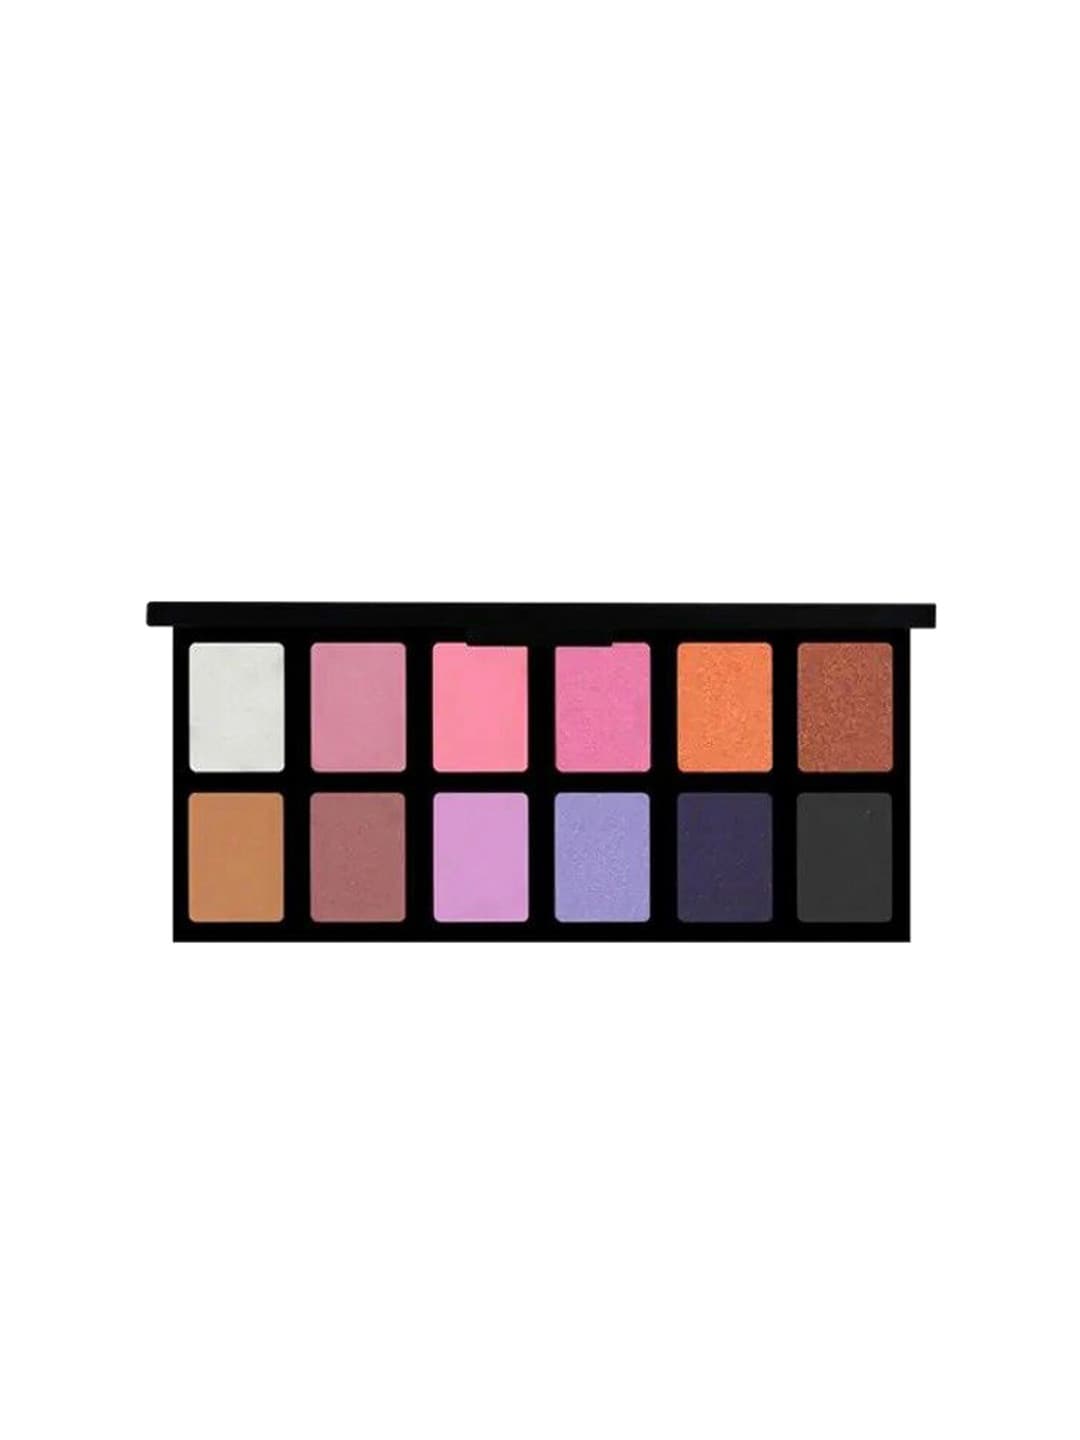 Sivanna Colors Double Exposure Eyeshadow Palette - HF350 01 Price in India